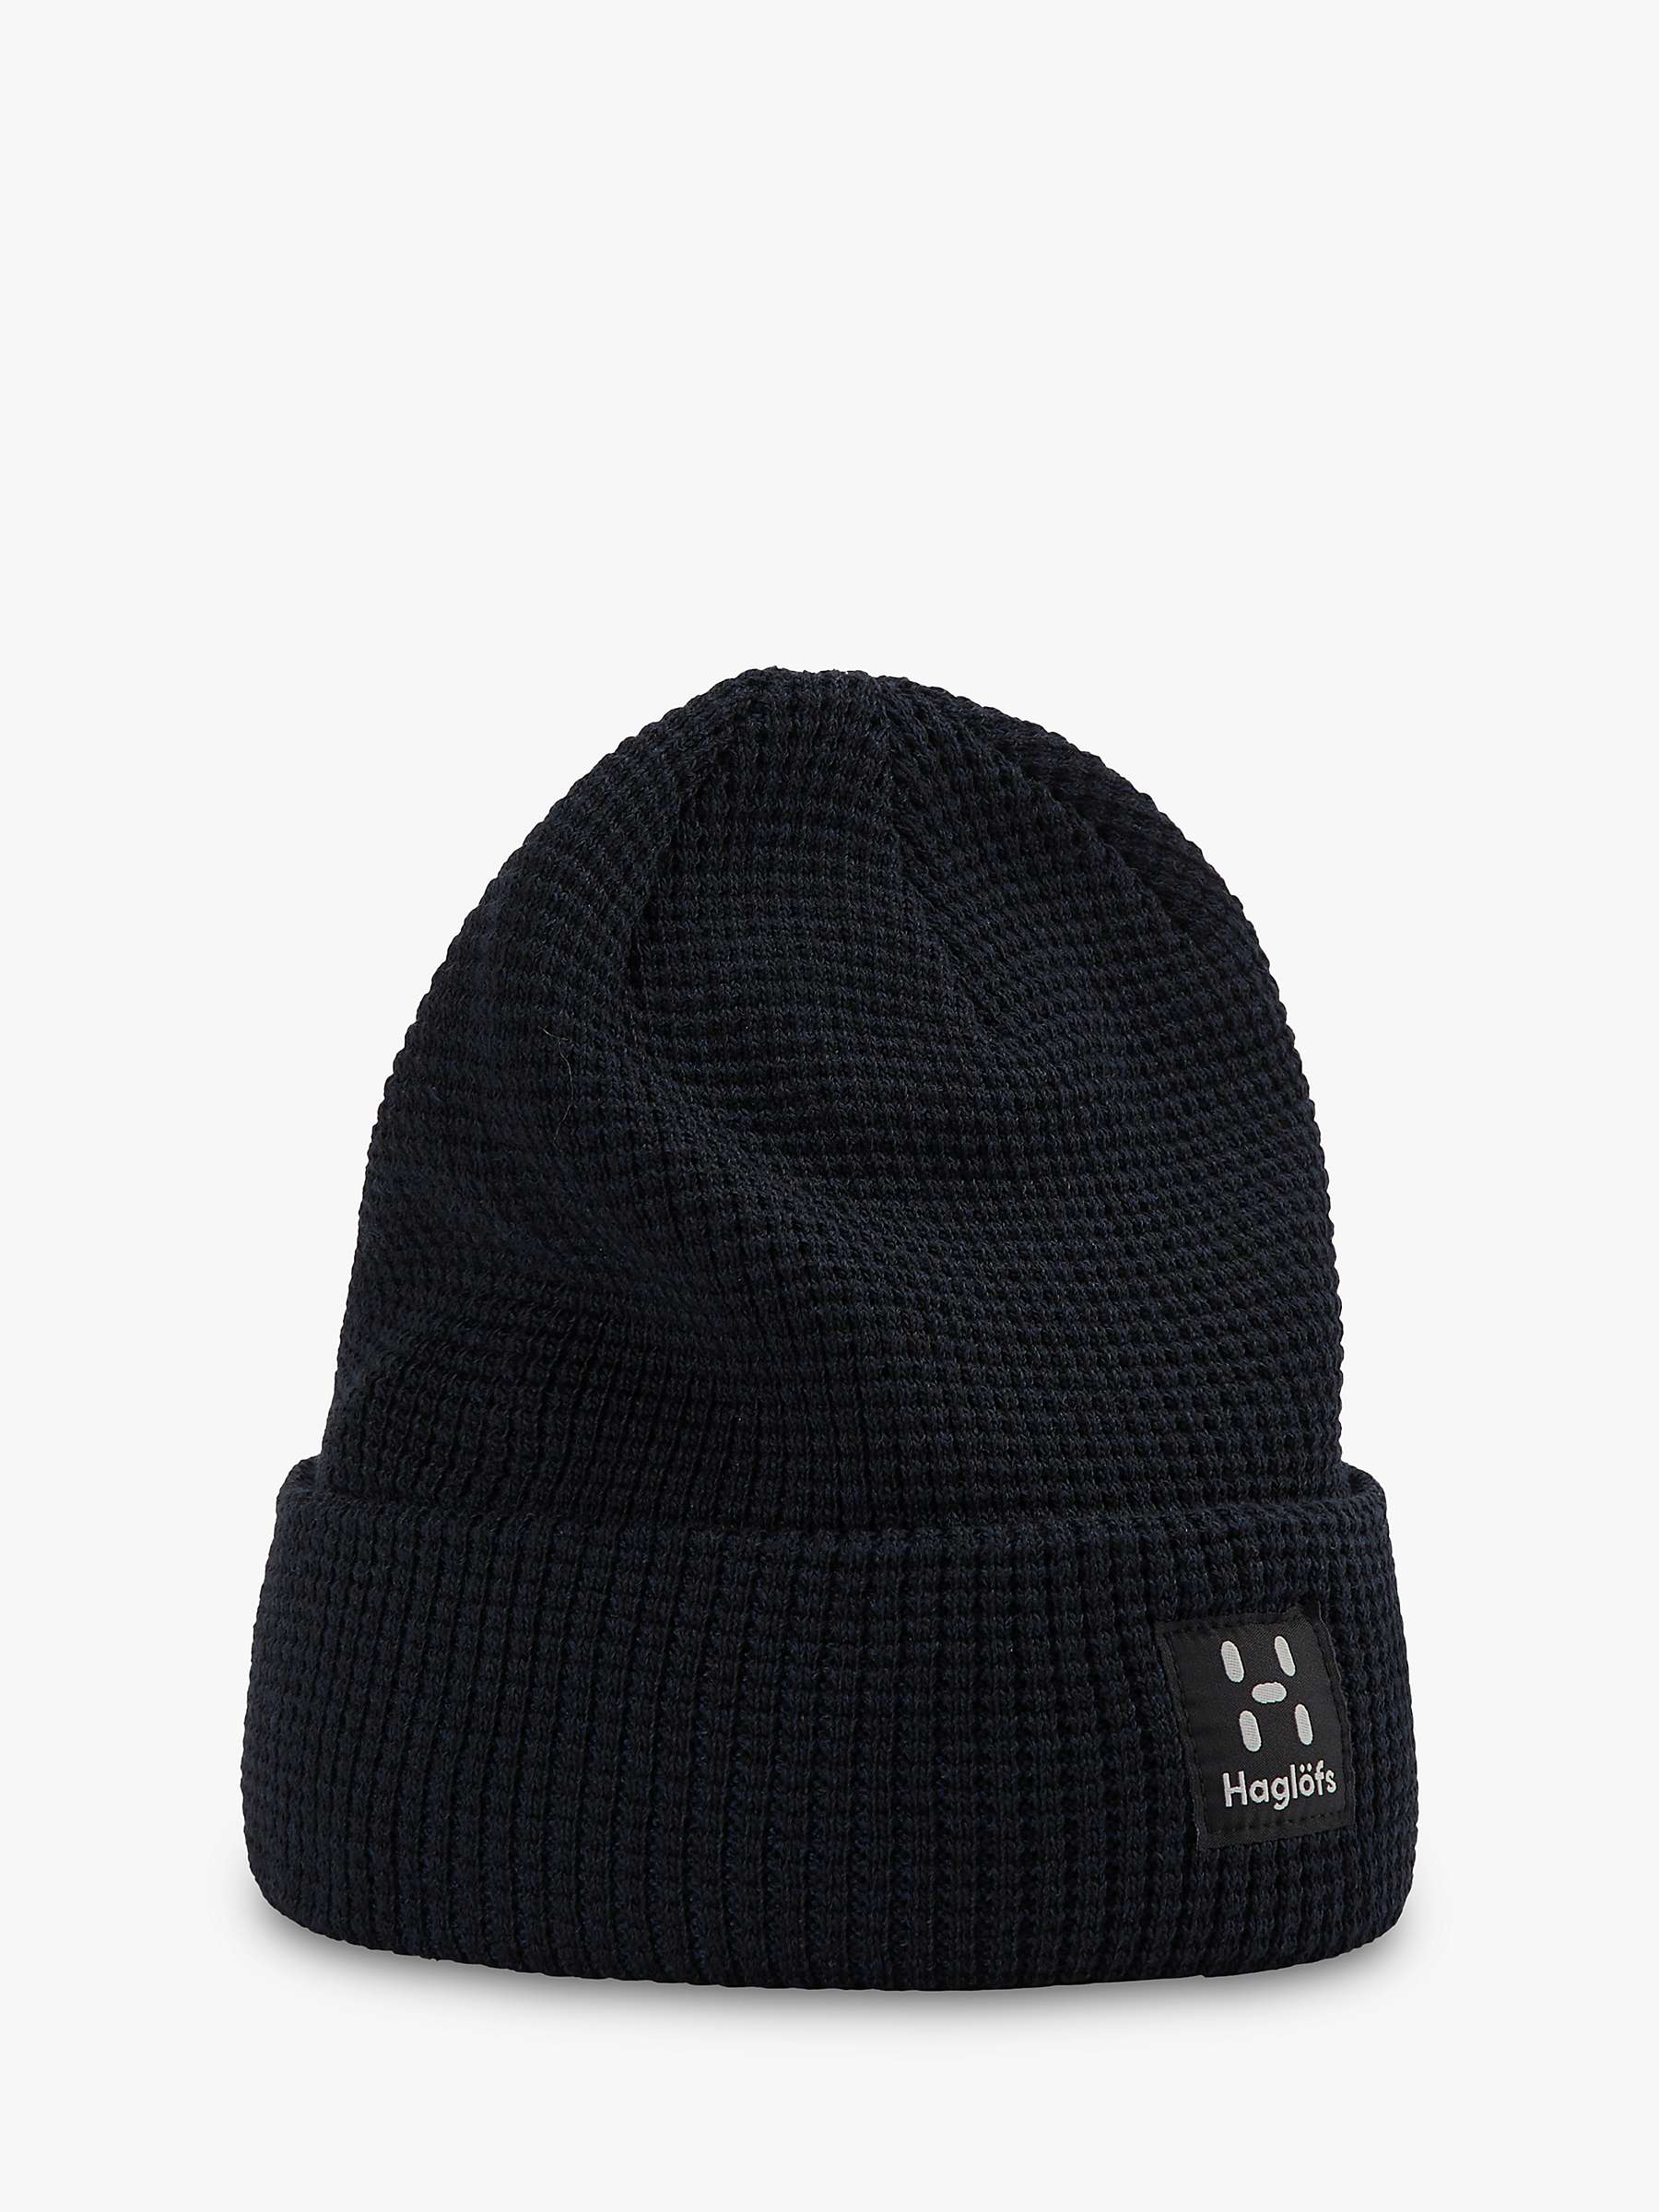 Buy Haglöfs Top Out Beanie Online at johnlewis.com